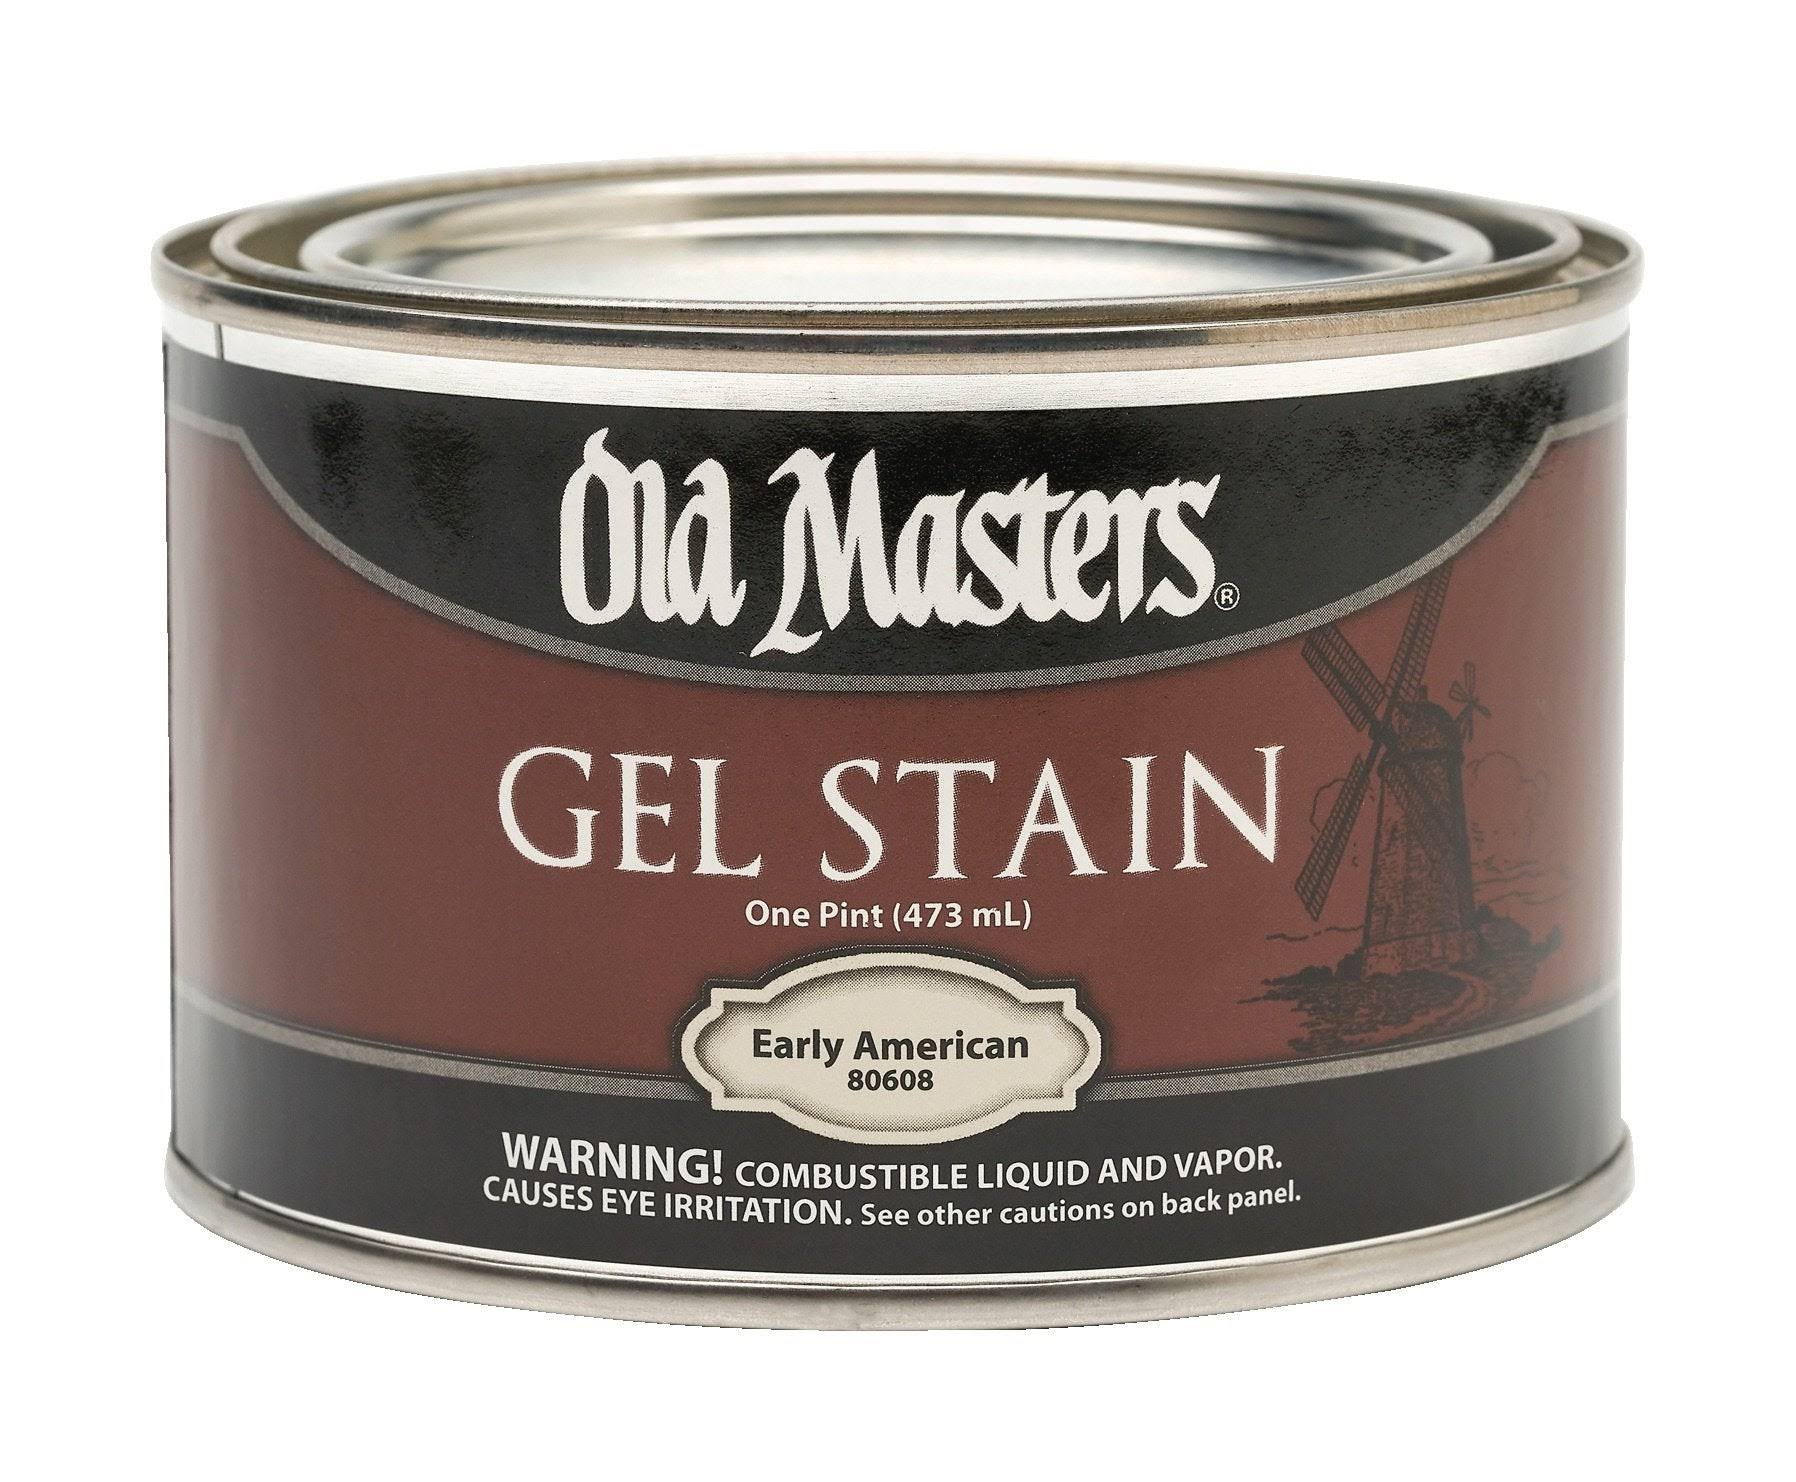 Old Masters Gel Stain - Early American, 1 Pint